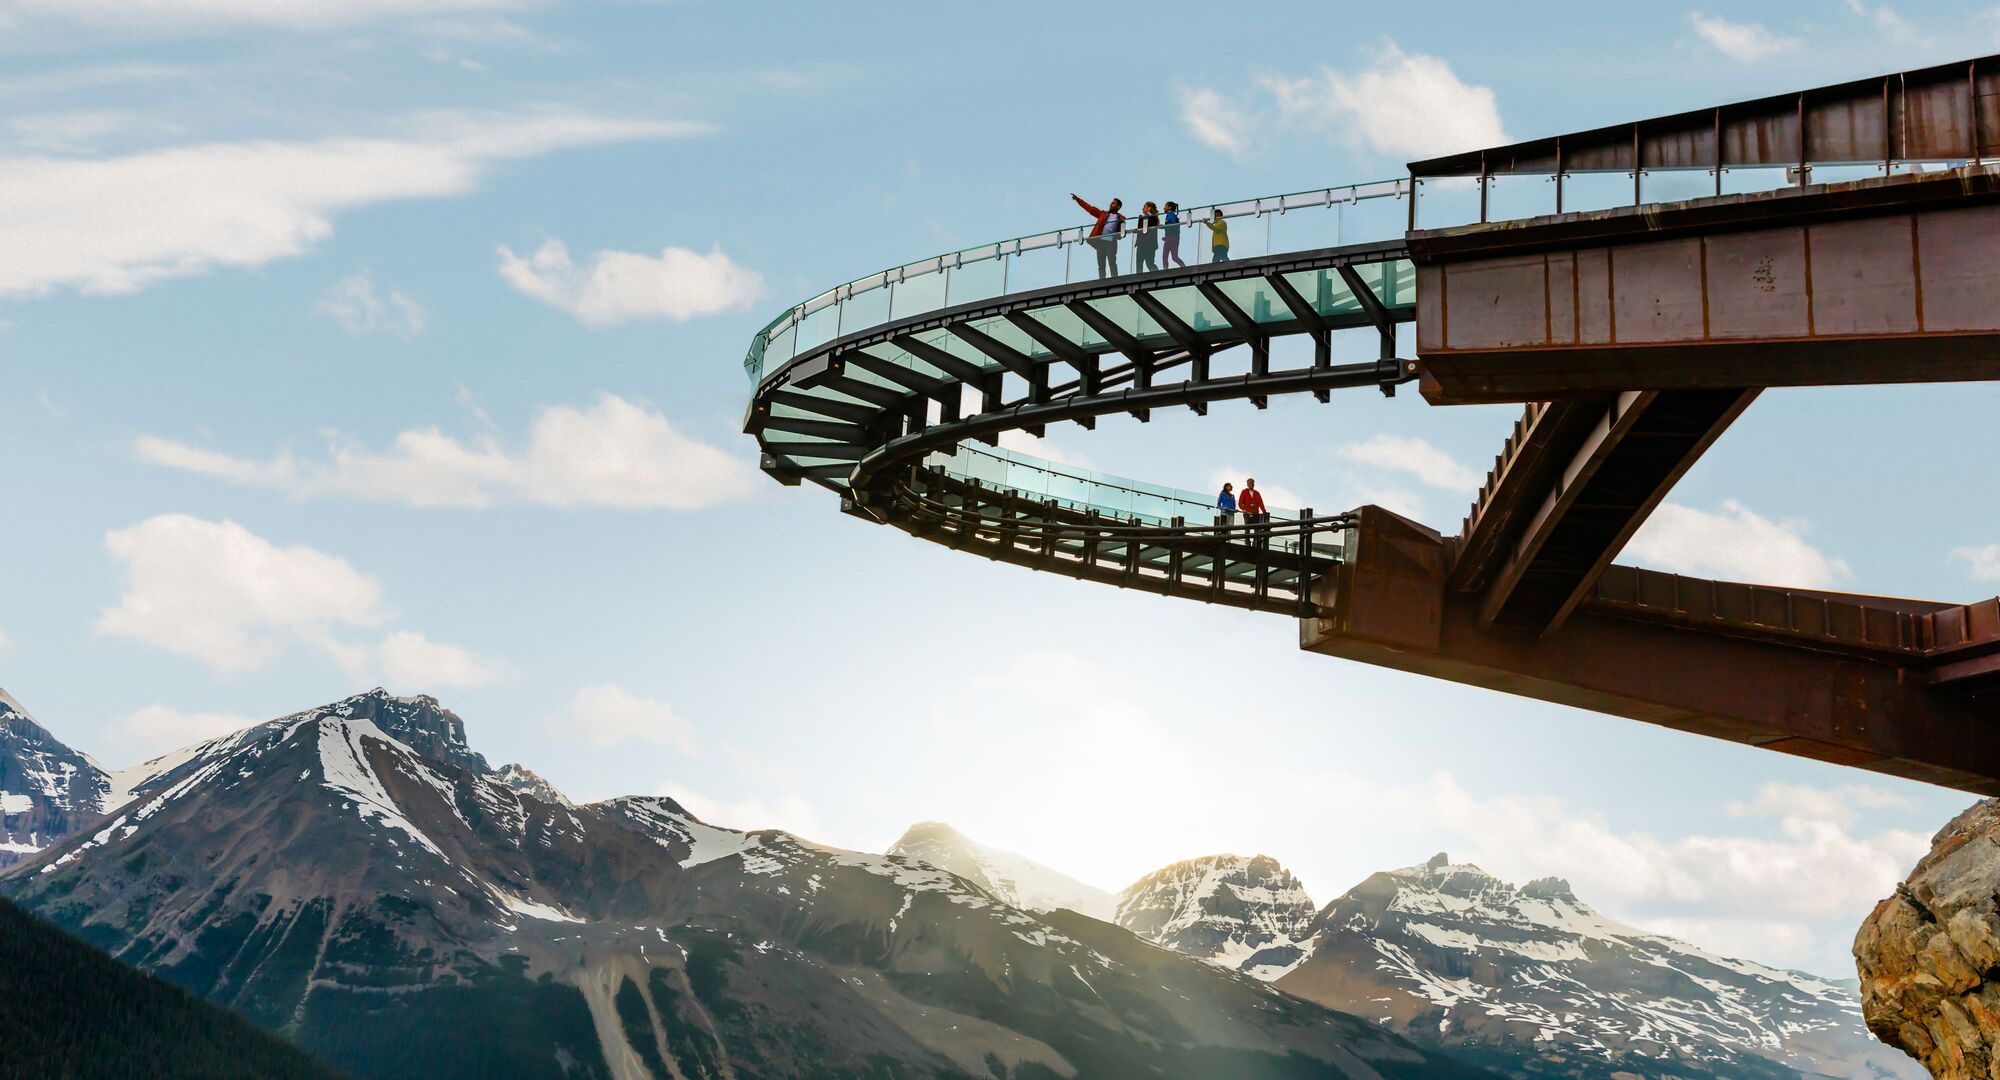 People standing on the Glacier Skywalk taking in the views of the surrounding mountains